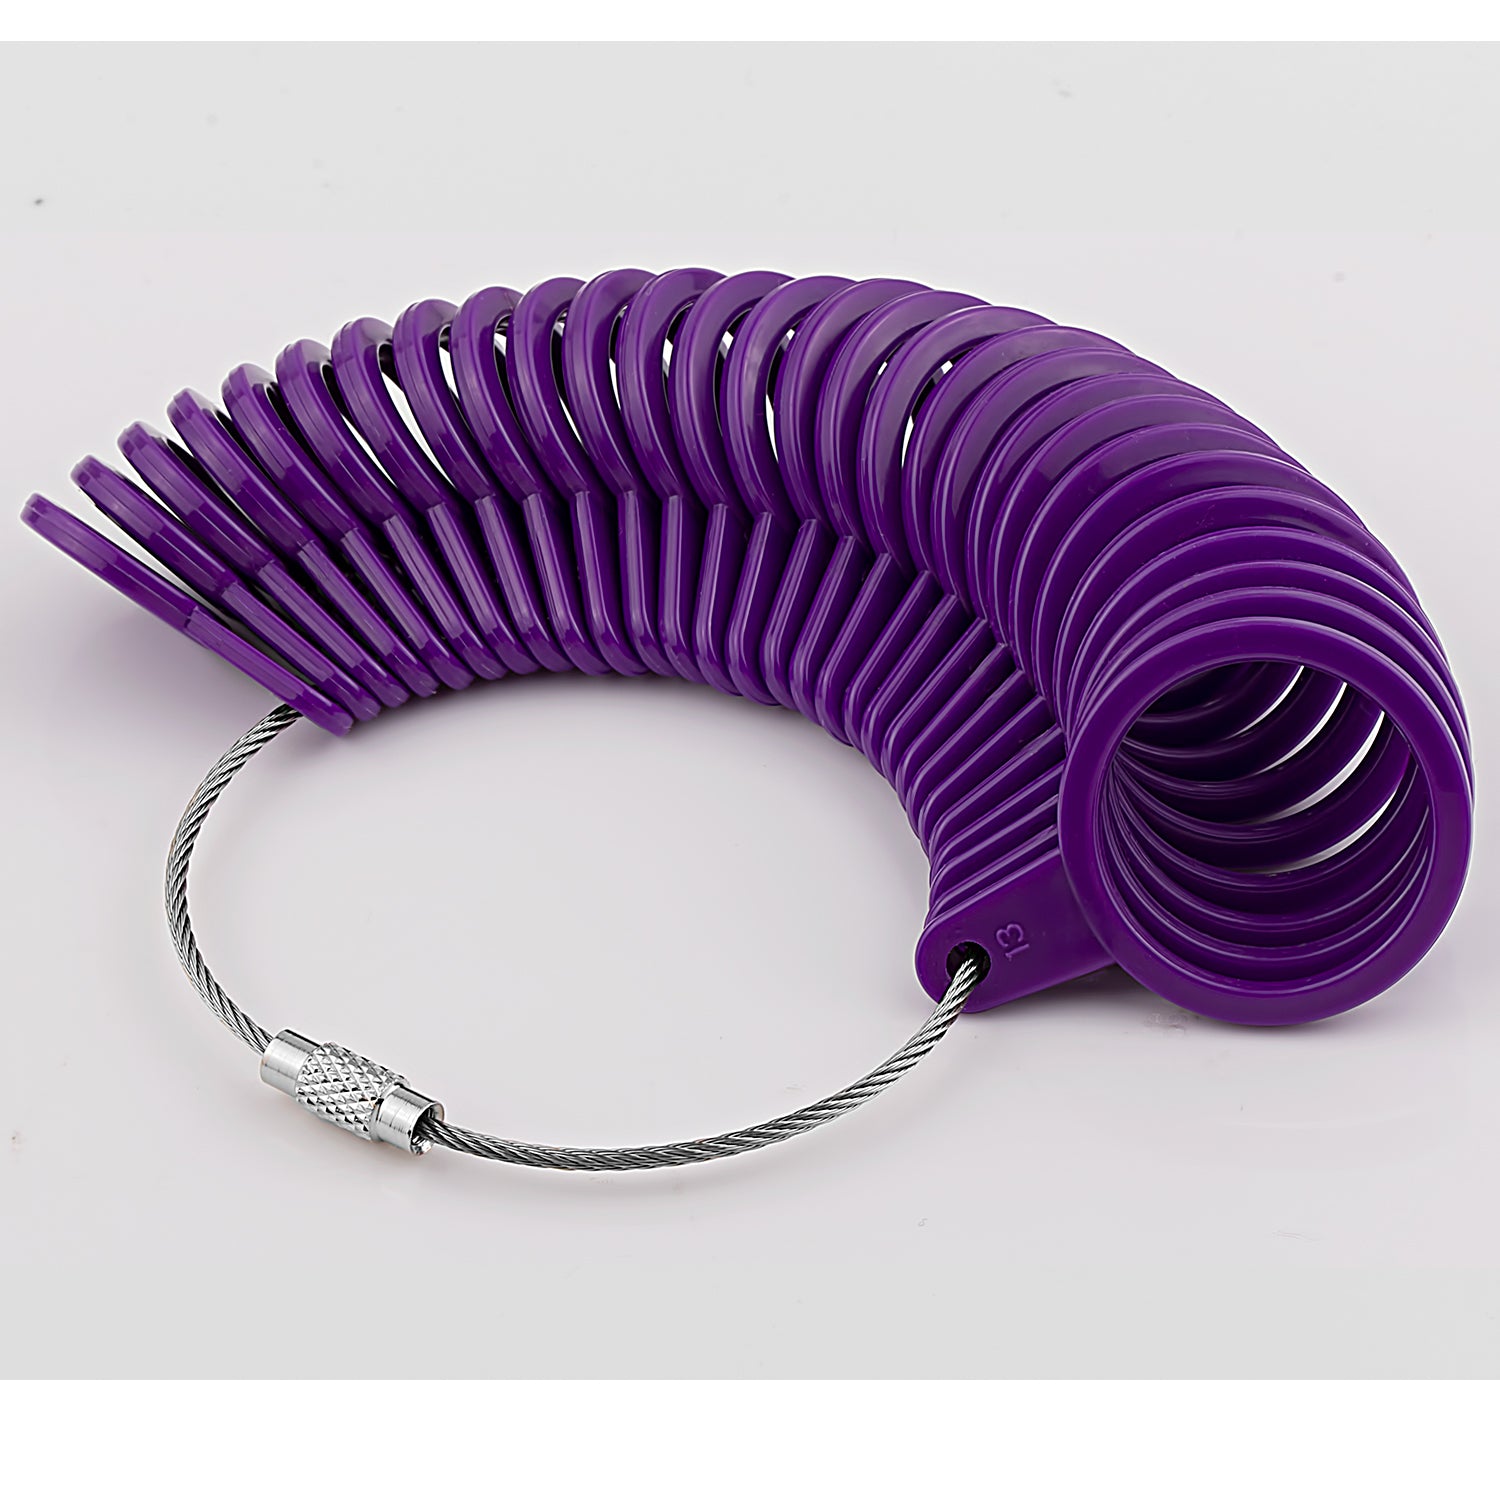  N/A Reusable Plastic Ring Jewelry Finger Sizer Measuring Tool  Detachable Ring Sizer Gauge(Purple) : Arts, Crafts & Sewing